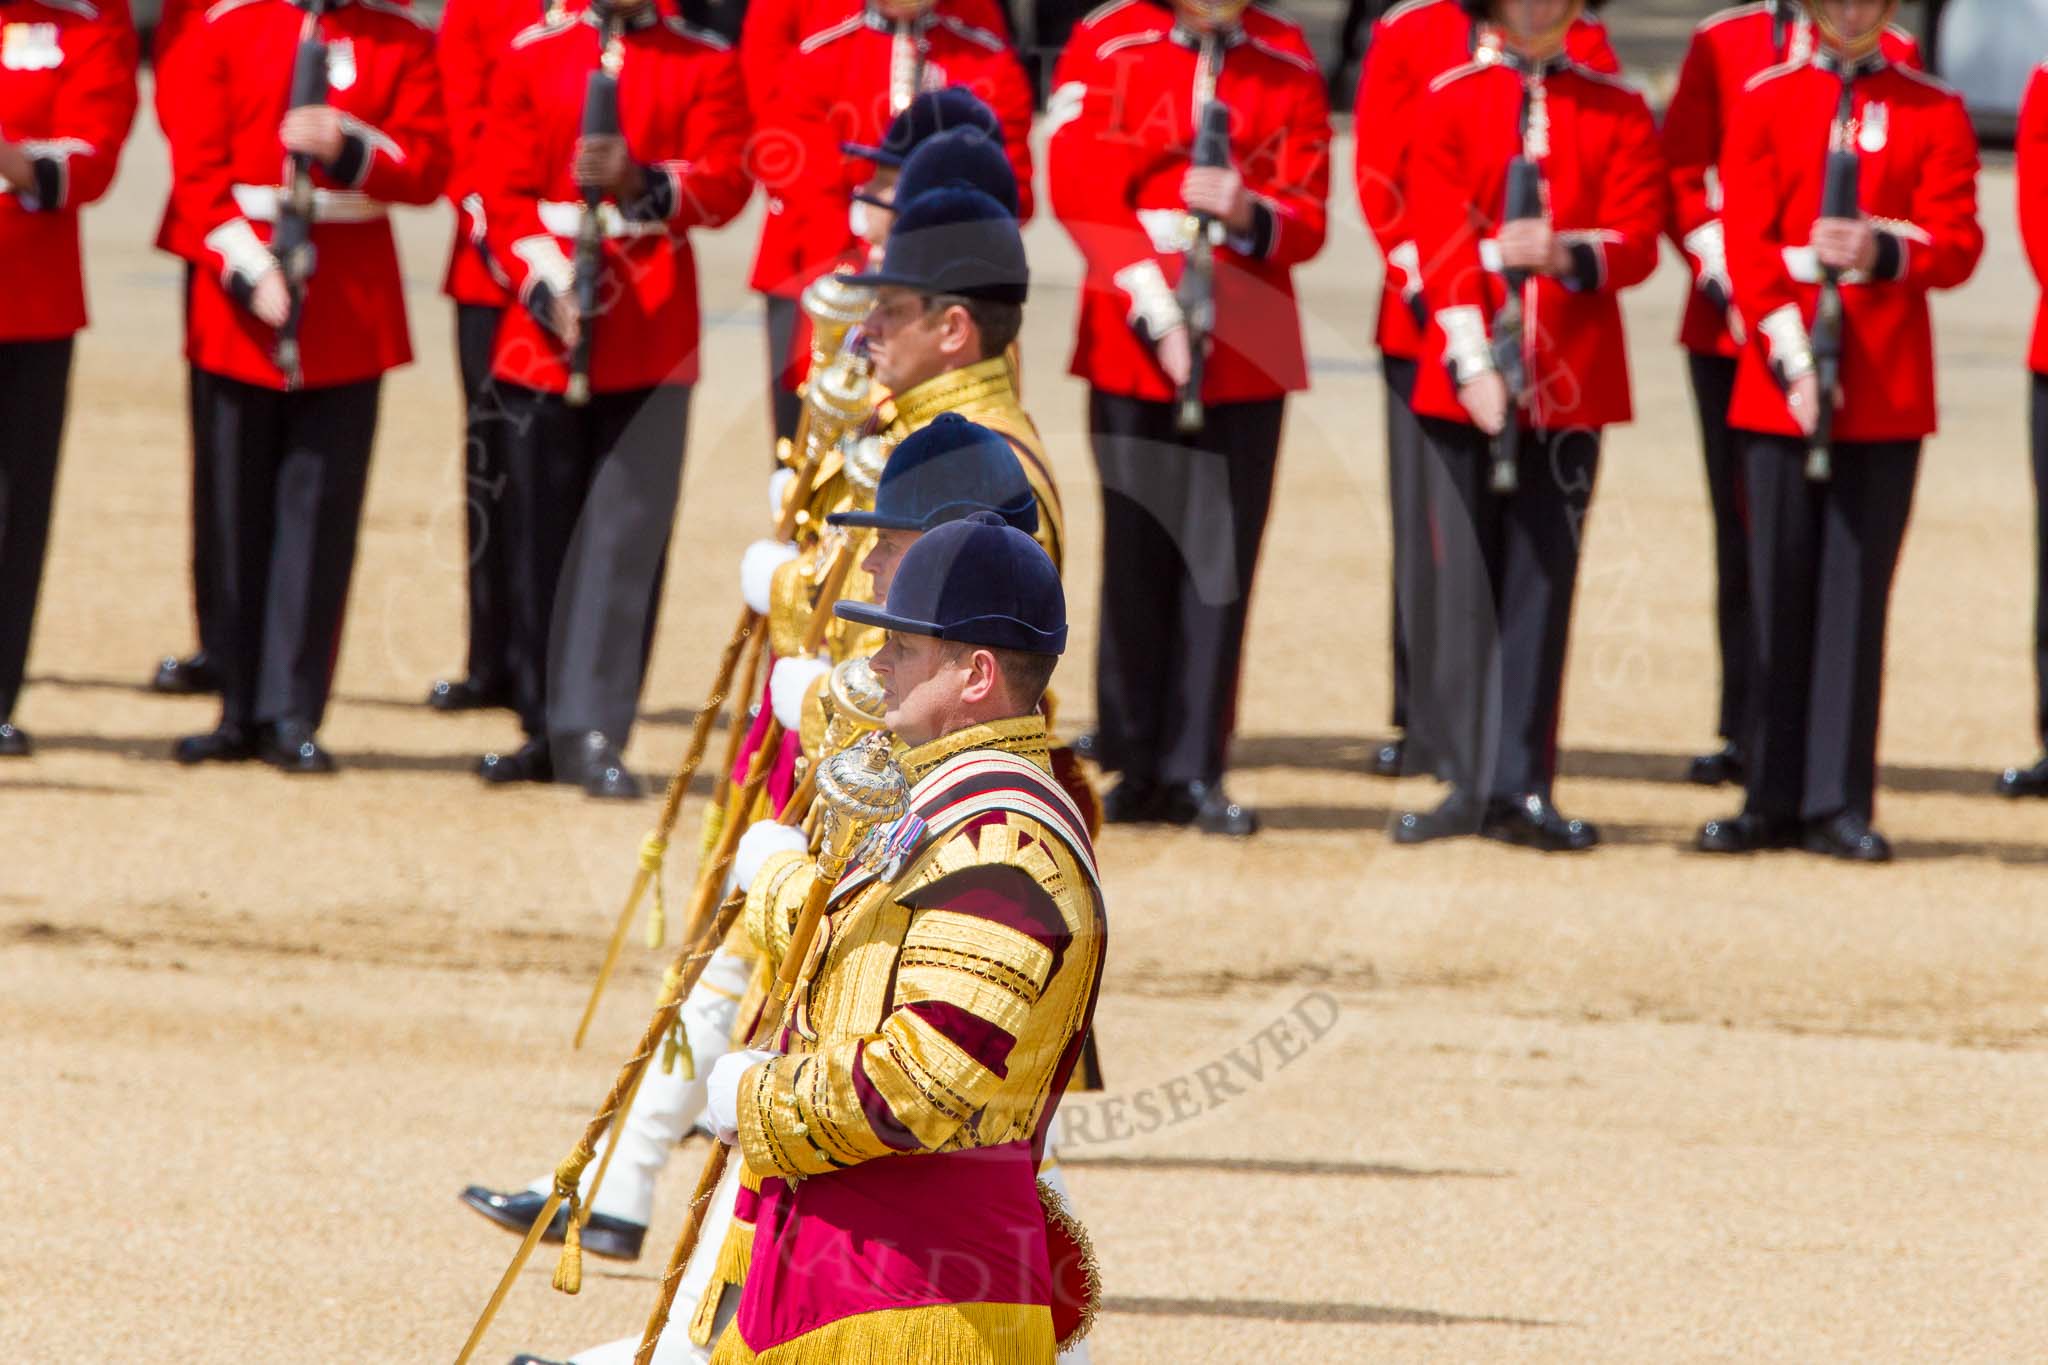 The Colonel's Review 2013: The five Drum Majors leading the Massed Bands as they are playing the Grenadiers Slow March..
Horse Guards Parade, Westminster,
London SW1,

United Kingdom,
on 08 June 2013 at 11:23, image #556